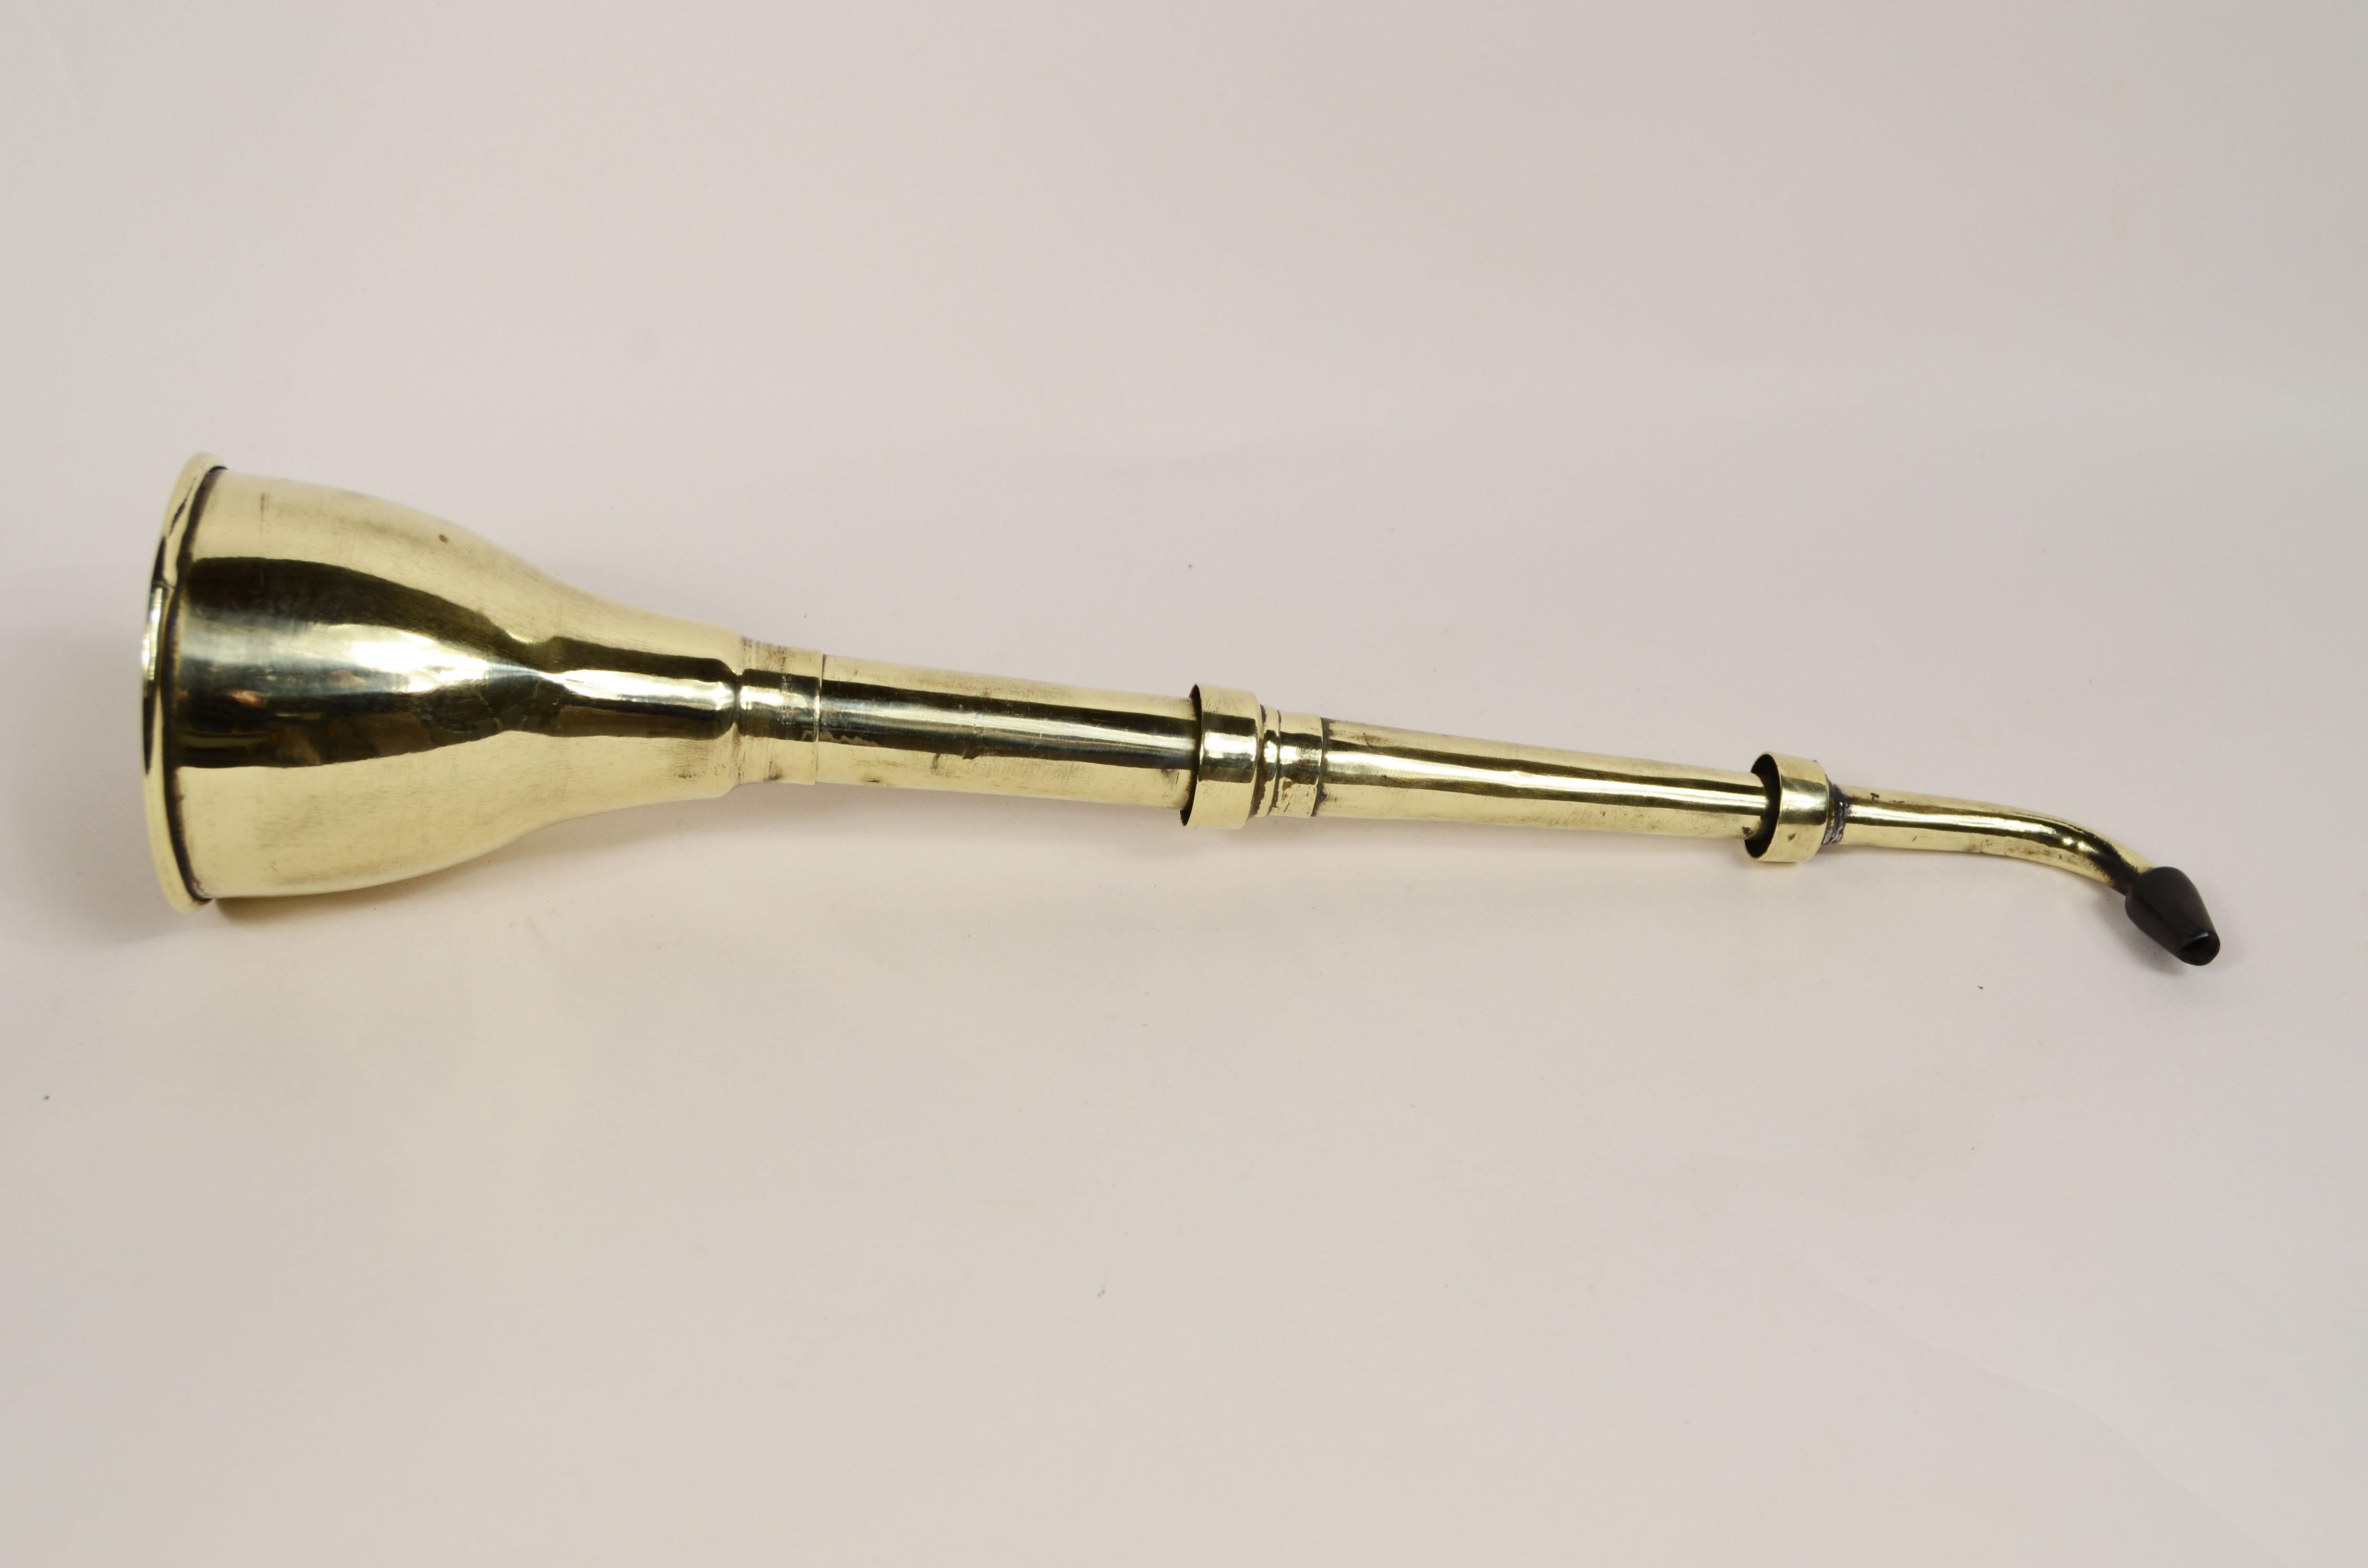 Telescopic acoustic cornet made of brass and Bakelite , English manufacture of the early 1900s.
The principle of its operation is based on the reflection of sound on the inner walls, so that more energy from the propagation of sound waves is